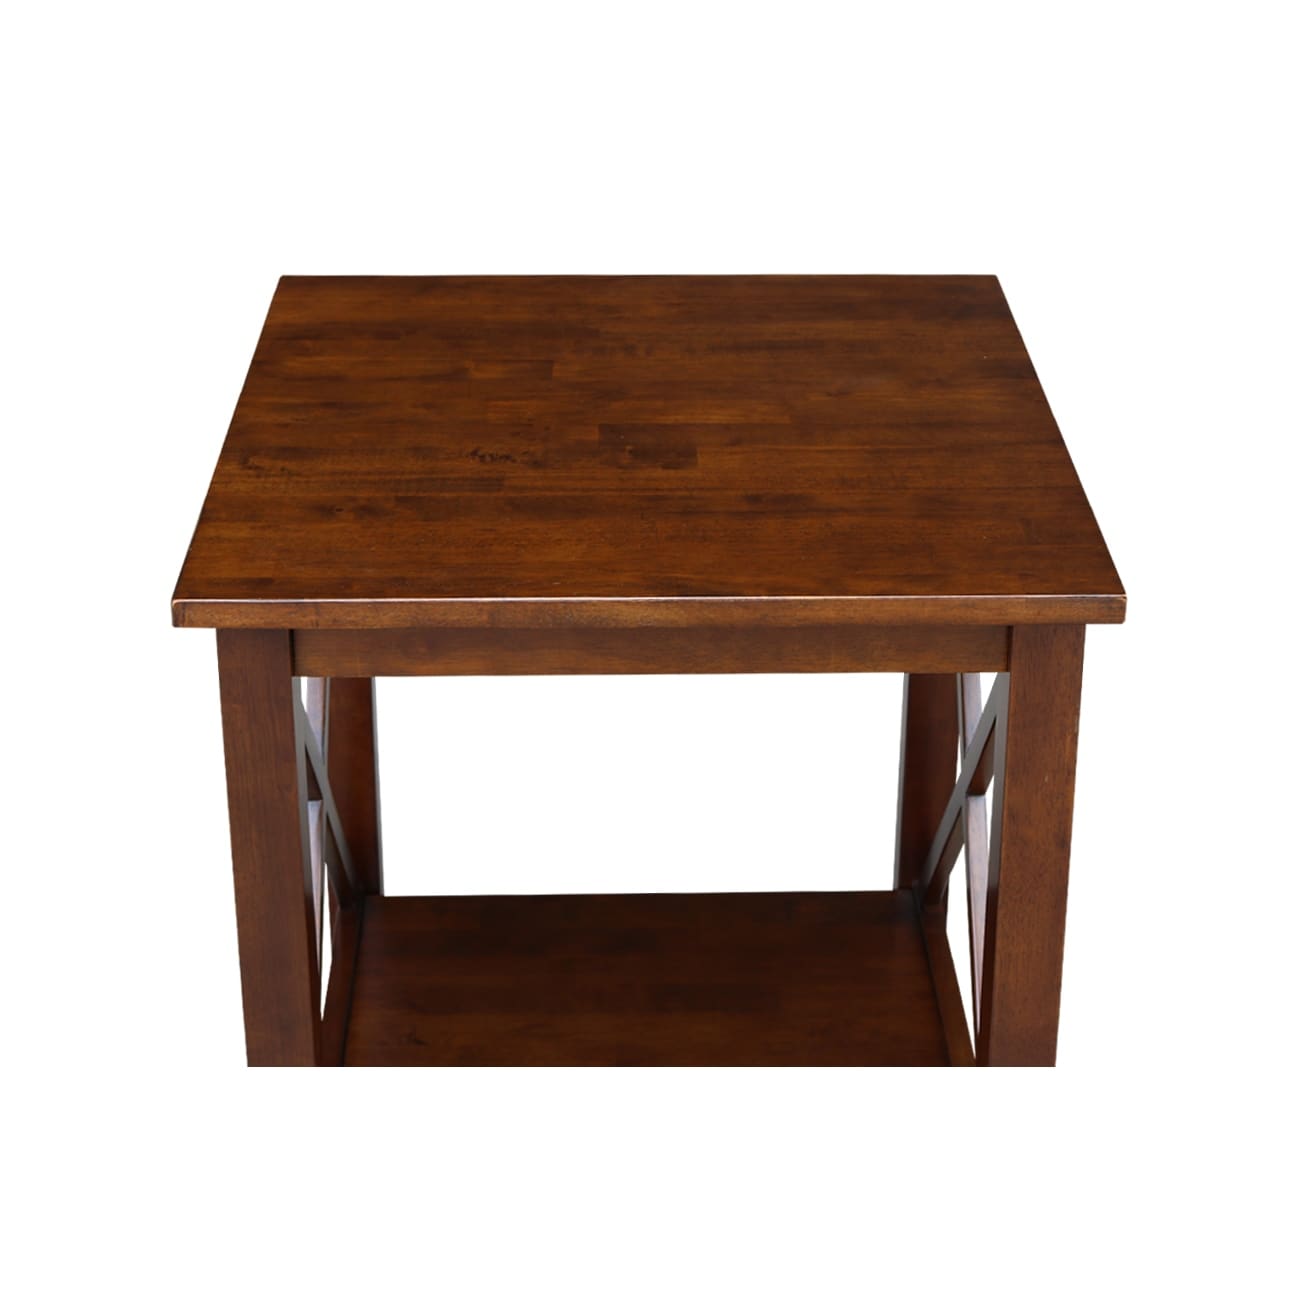 International Concepts Unfinished Portman Accent Table, Brown